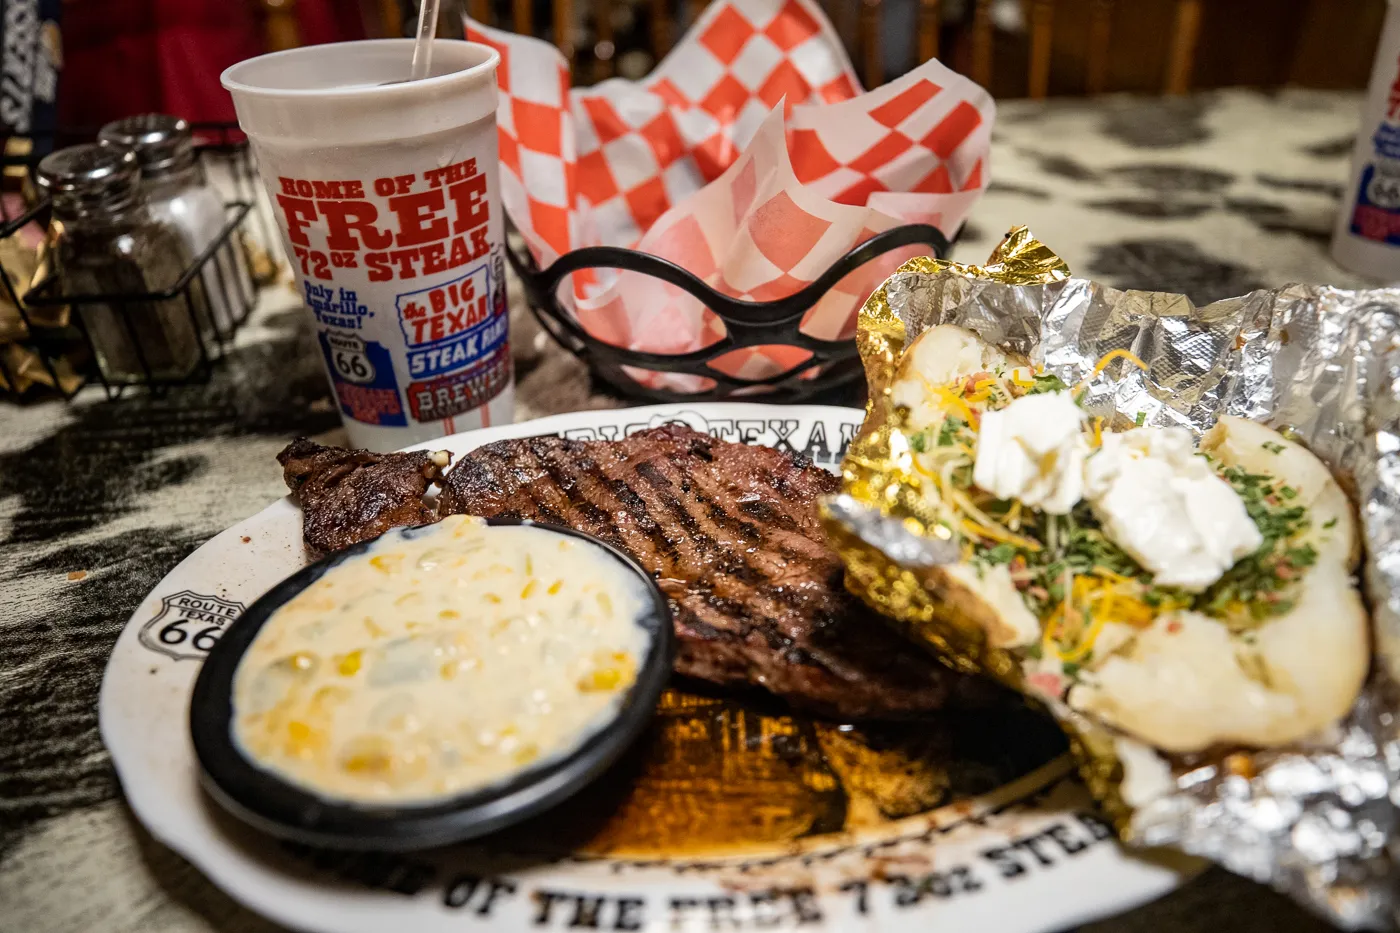 Steak dinner with a ribeye steak, loaded baked potato, and green chili creamed corn at The Big Texan Steak Ranch in Amarillo, Texas